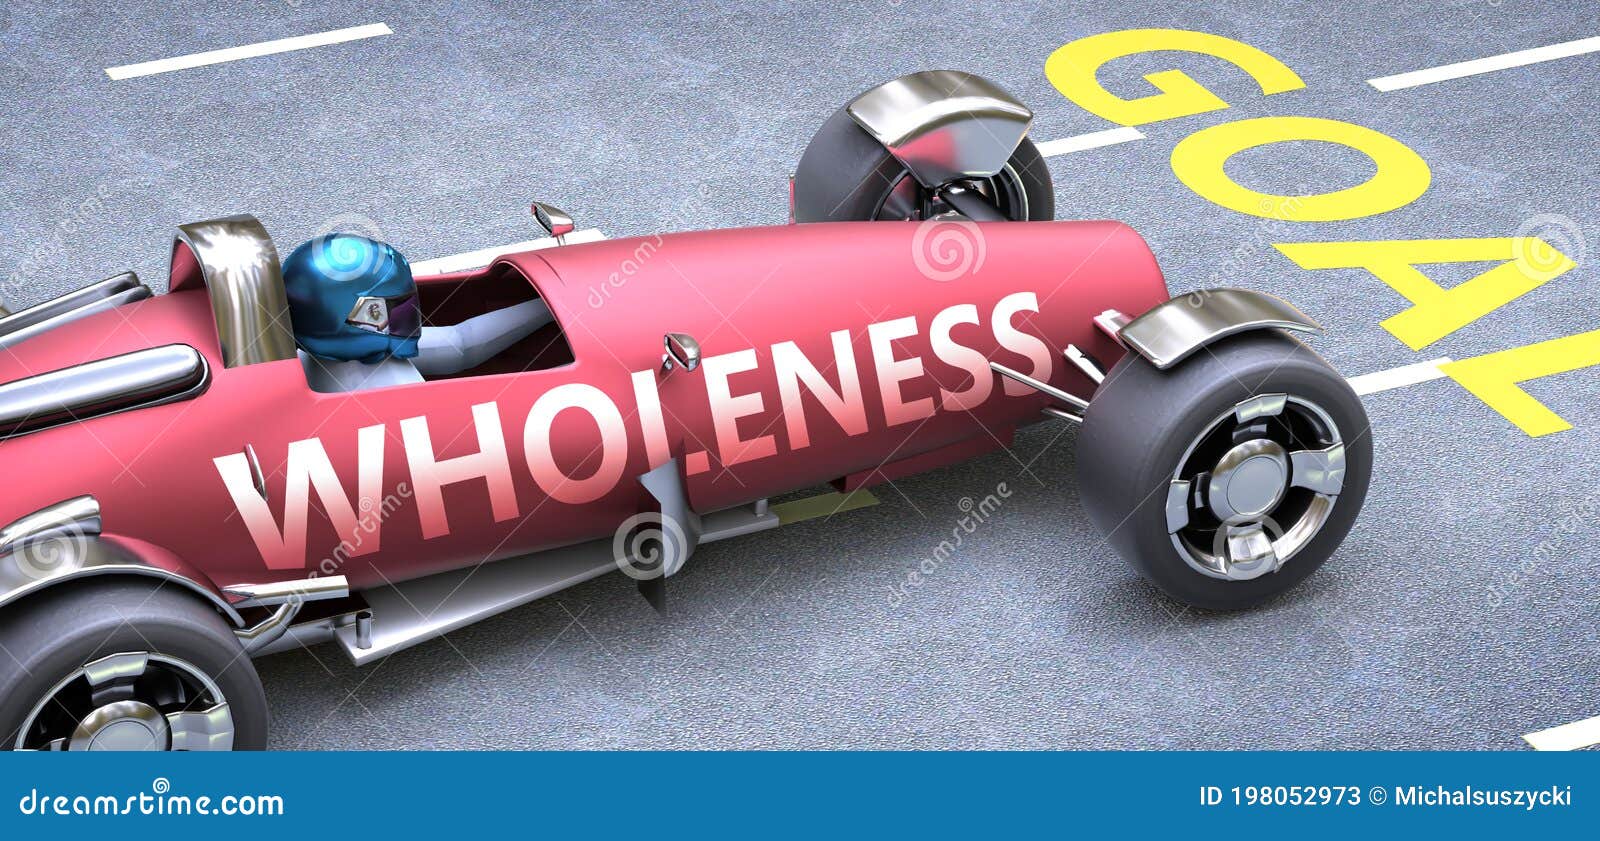 wholeness helps reaching goals, pictured as a race car with a phrase wholeness on a track as a metaphor of wholeness playing vital